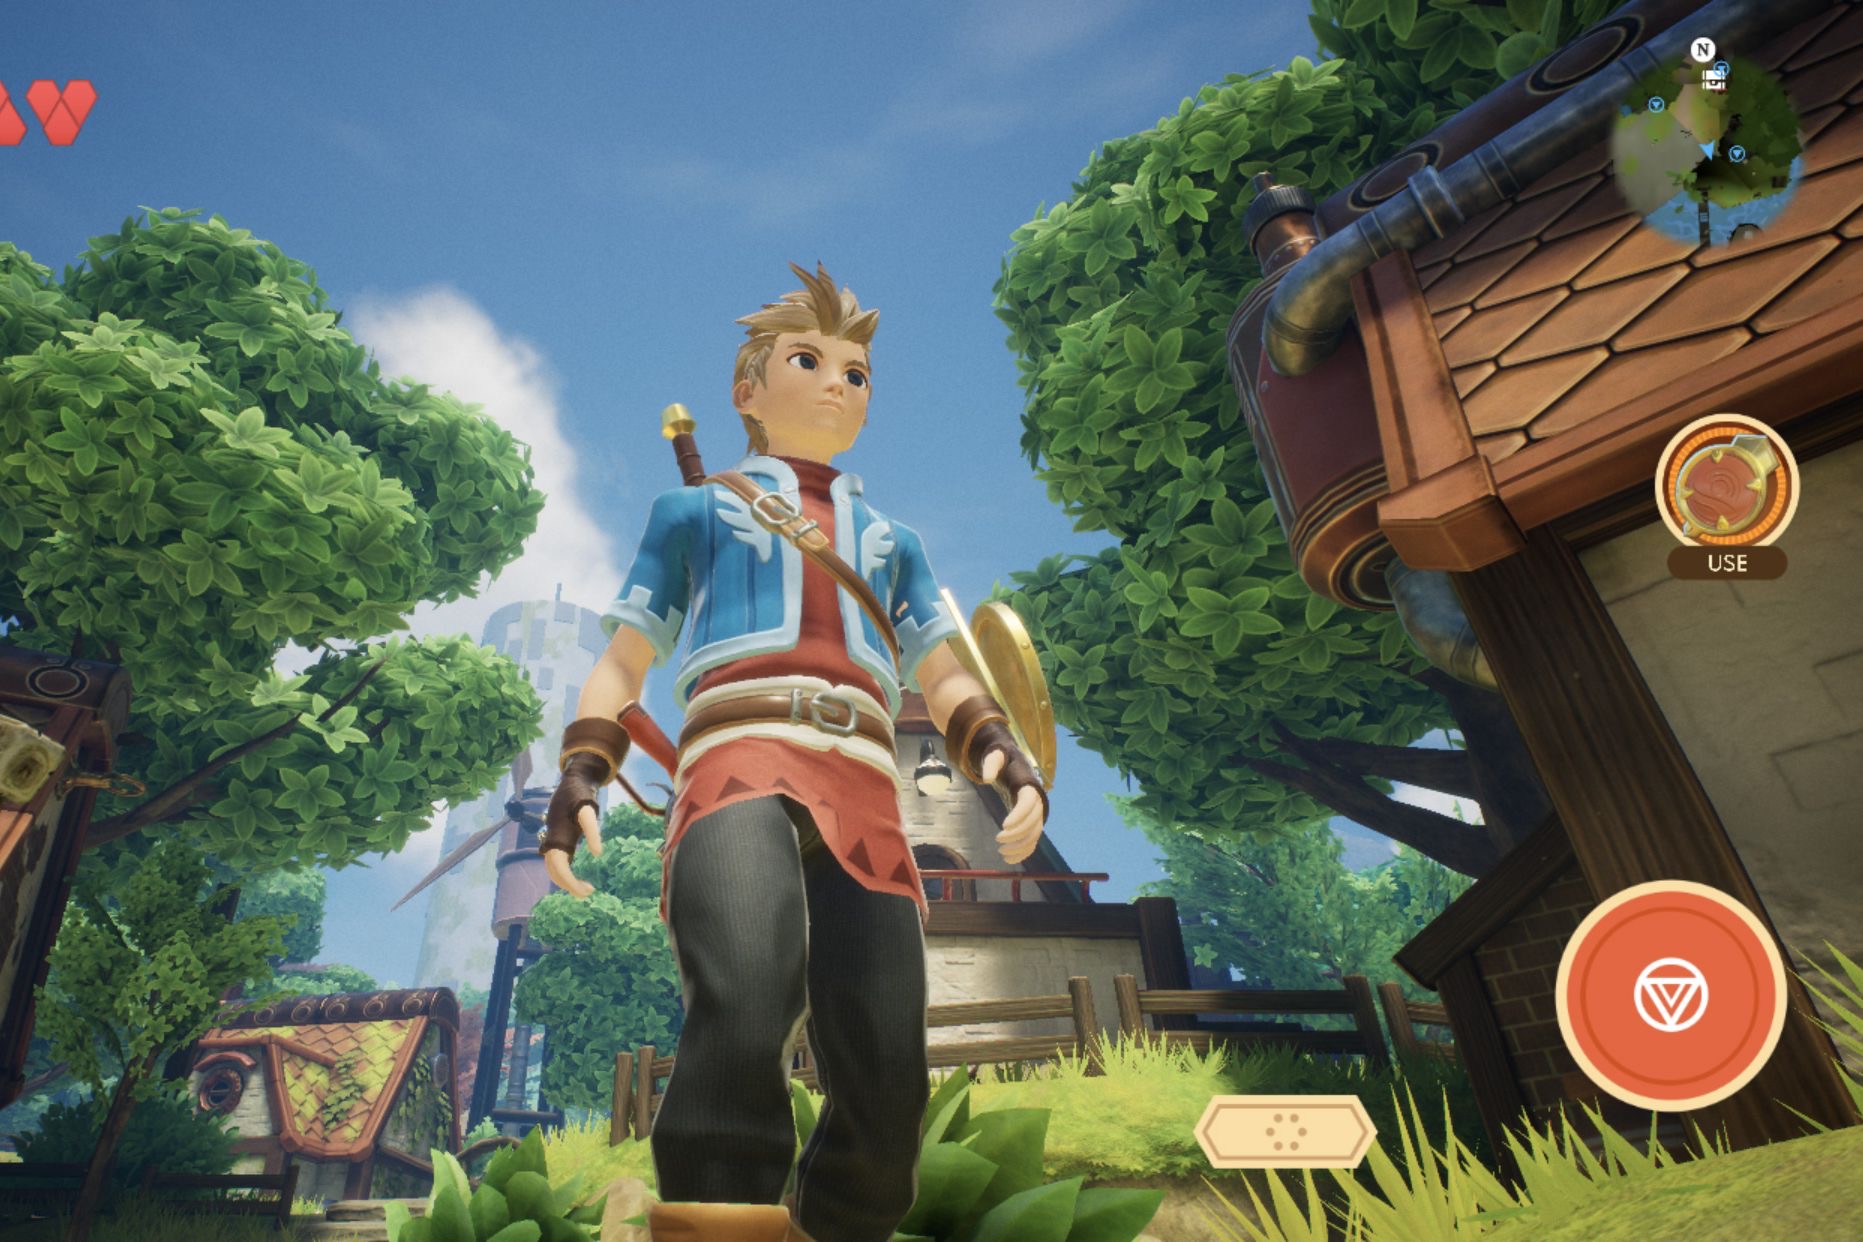 The main protagonist sets out on his adventure in Oceanhorn 2 on iOS.